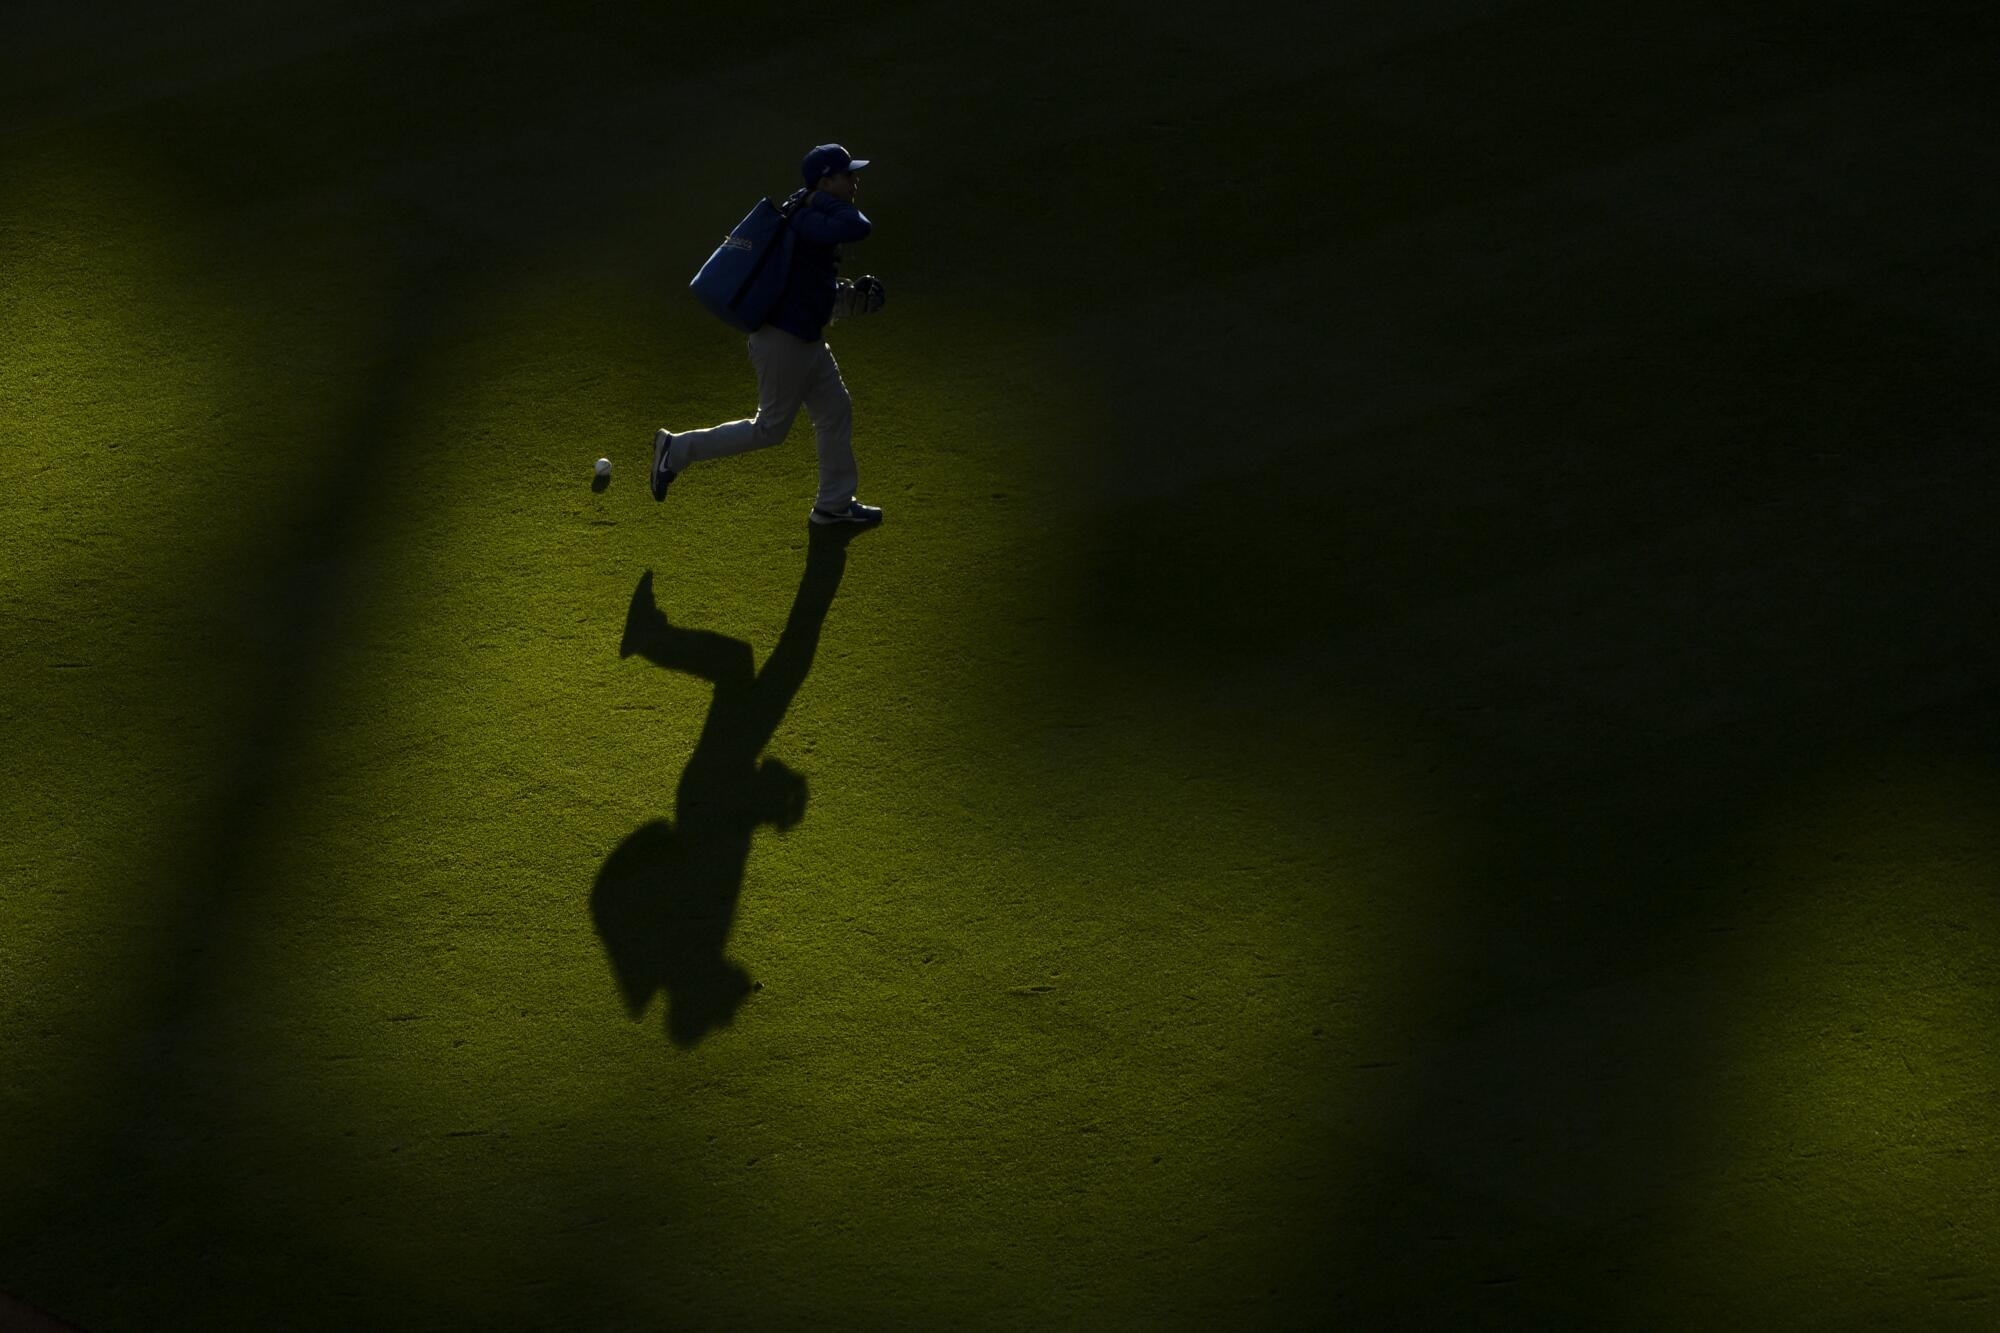 A shadow is cast as Los Angeles Dodgers personnel runs a bag across the outfield before Game 2.